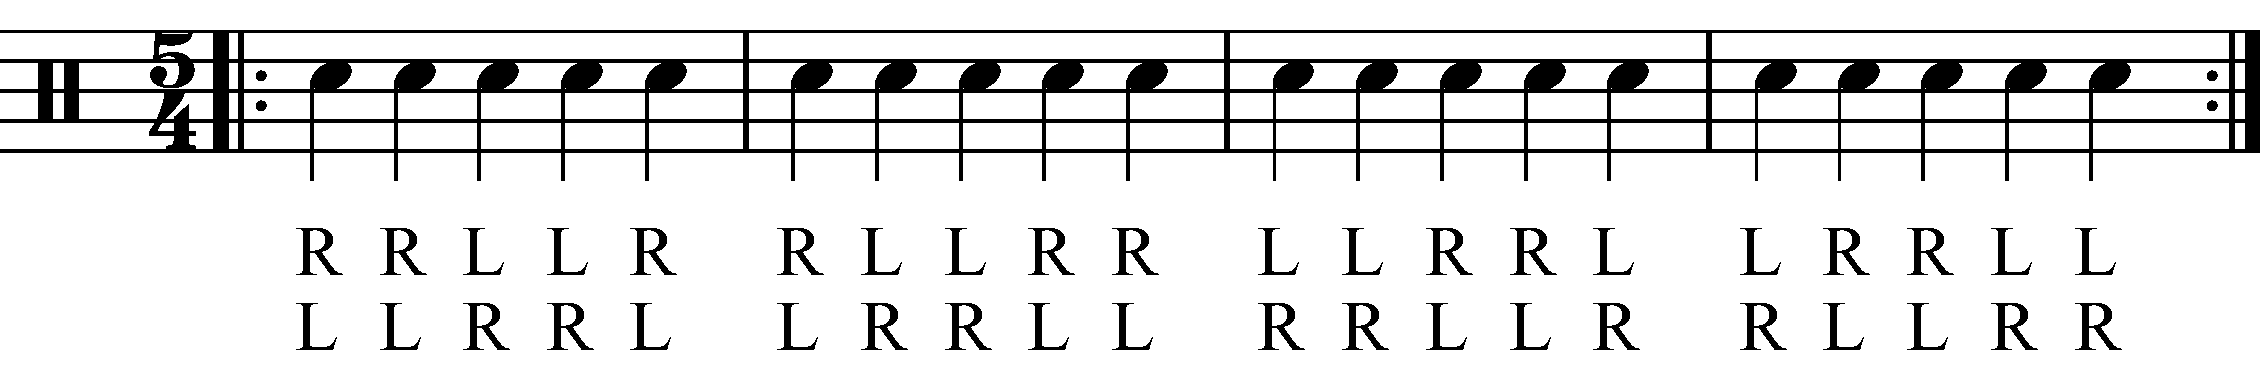 A Double Stroke Roll in 5/4 as dotted crotchets.